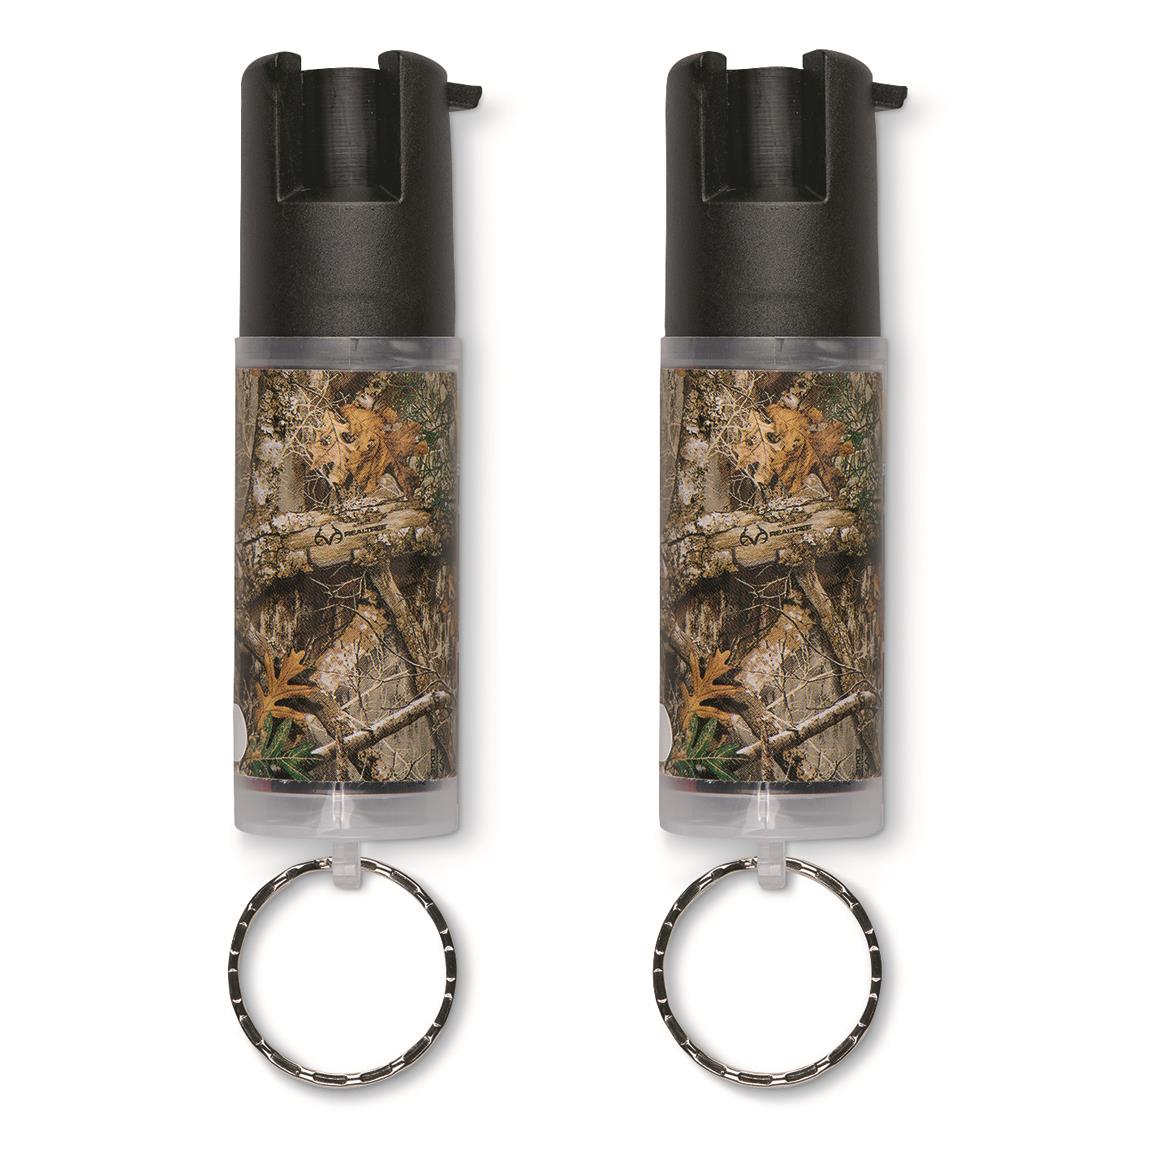 Sabre Red Realtree Edge Pepper Spray with Key Ring, 2 Pack